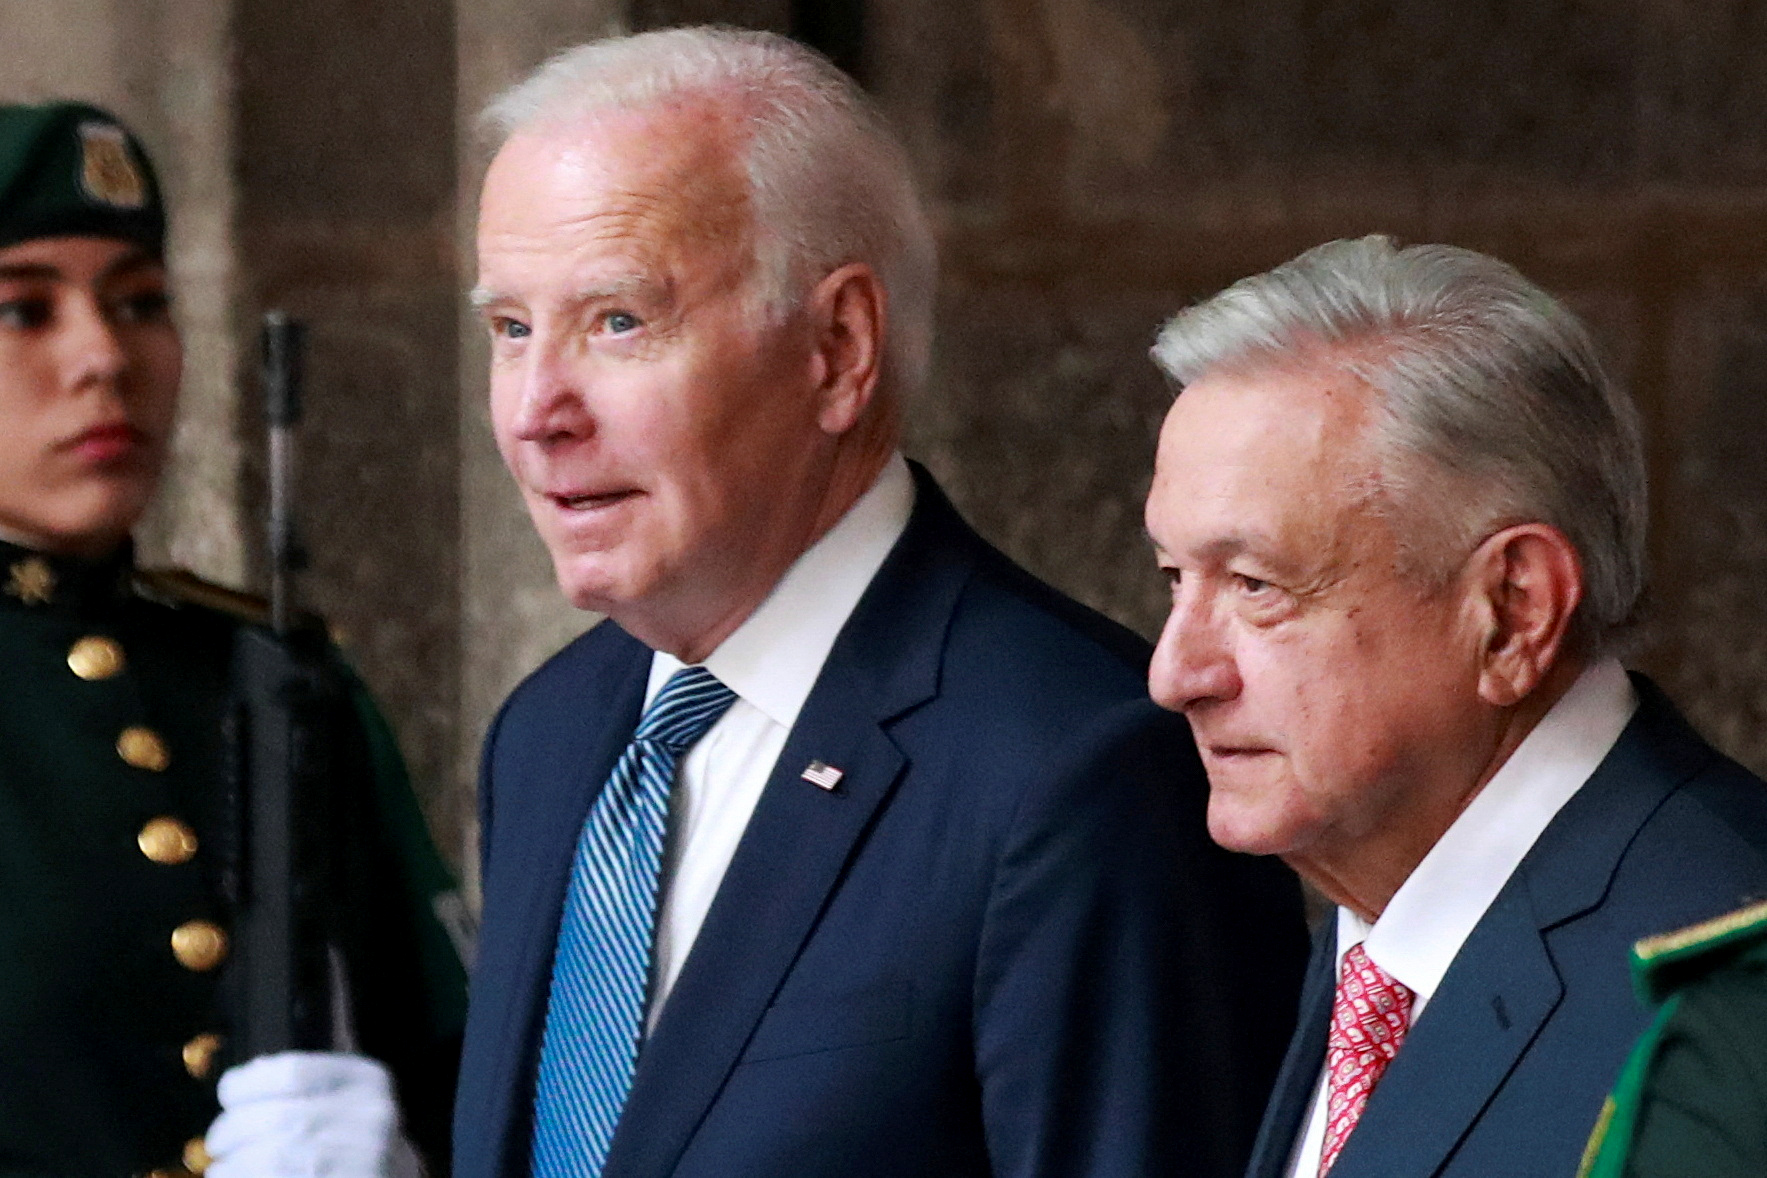 PHOTO: President Joe Biden meets his Mexican counterpart Andres Manuel Lopez Obrador at an official welcoming ceremony before taking part in the North American Leaders' Summit at the National Palace in Mexico City, Mexico January 9, 2023.